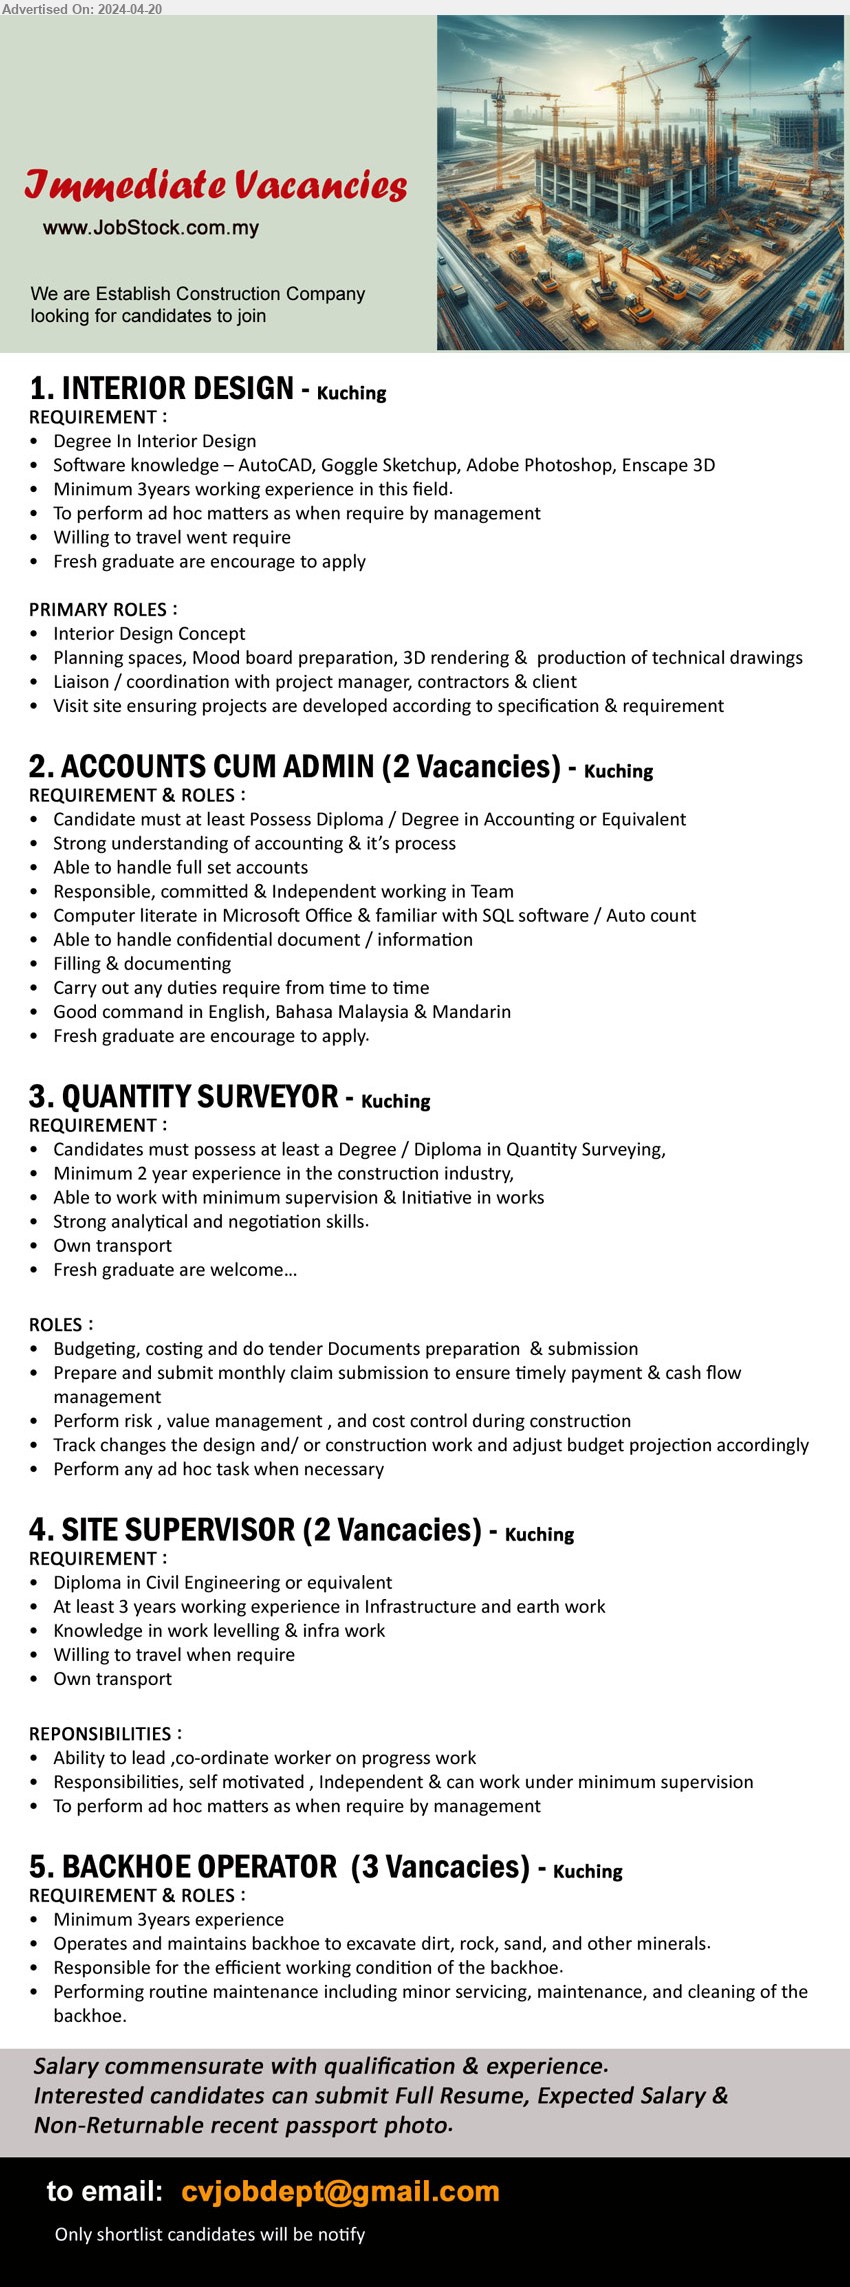 ADVERTISER (Construction Company) - 1. INTERIOR DESIGN (Kuching), Degree In Interior Design, Software knowledge – AutoCAD, Goggle Sketchup, Adobe Photoshop, Enscape 3D,...
2. ACCOUNTS CUM ADMIN (Kuching), Possess Diploma / Degree in Accounting, Computer literate in Microsoft Office & familiar with SQL software / Auto count,...
3. QUANTITY SURVEYOR (Kuching), Degree / Diploma in Quantity Surveying, 2 yrs. exp.,...
4. SITE SUPERVISOR (Kuching), 2 posts, Diploma in Civil Engineering, 3 yrs. exp.;,...
5. BACKHOE OPERATOR (Kuching), 3 posts, Operates and maintains backhoe to excavate dirt, rock, sand, and other minerals. ,...
Email resume to ...